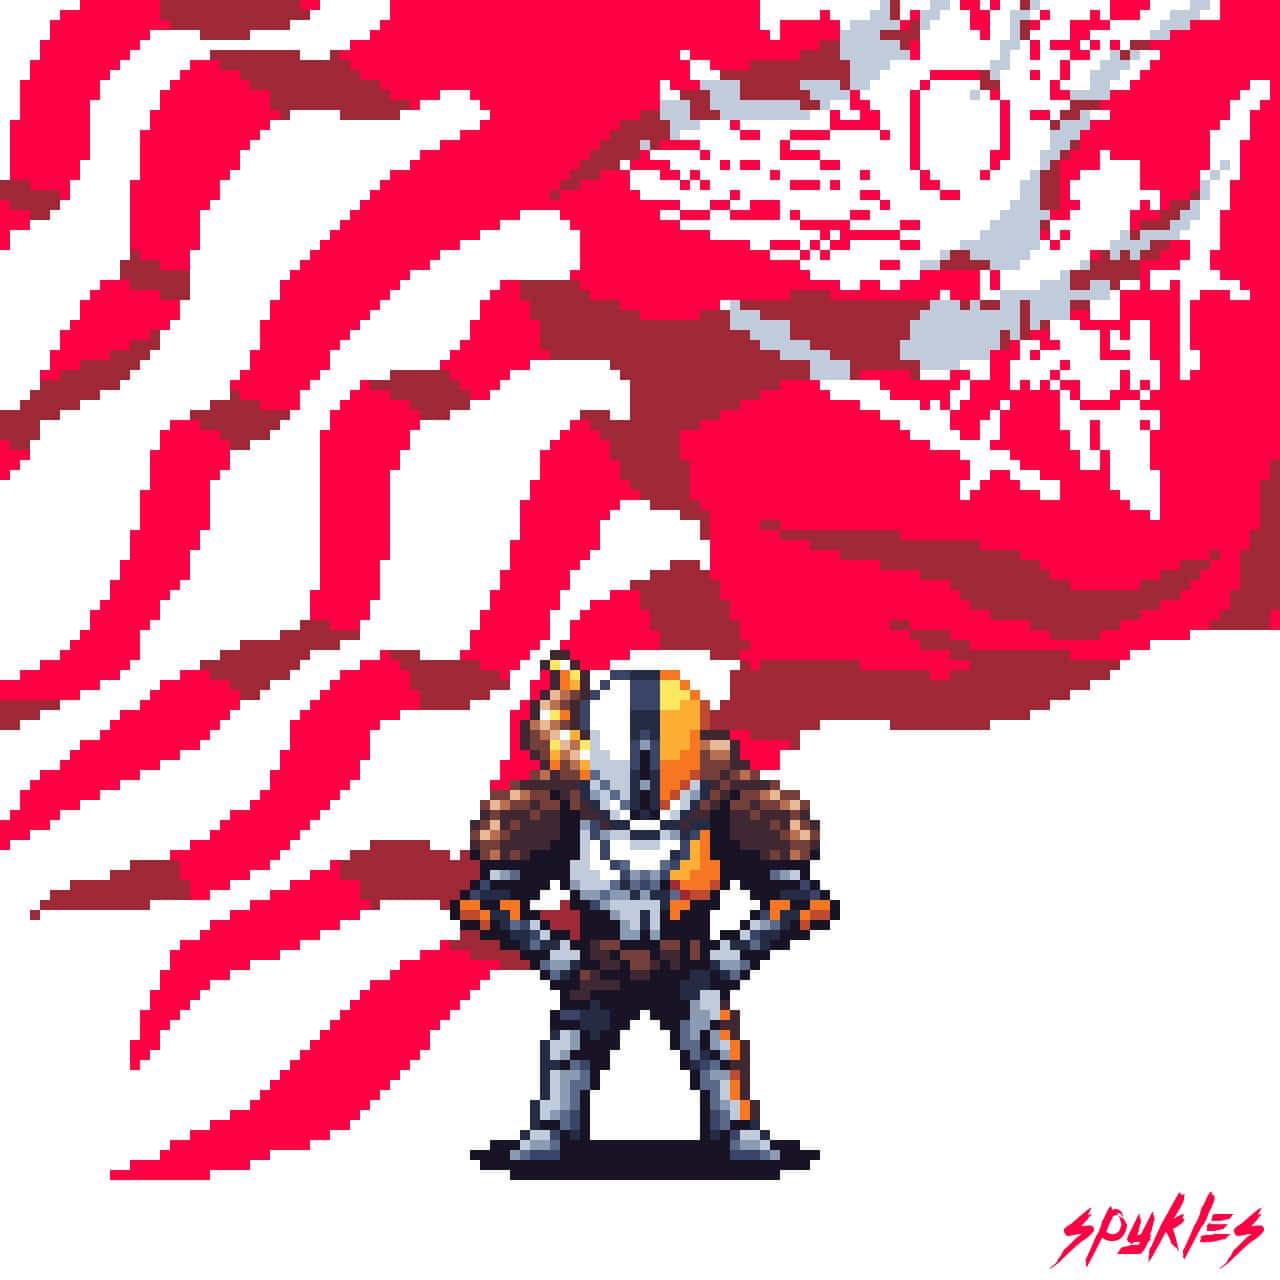 “Special Pixel Art from the Popular Video Game Destiny” Wallpaper